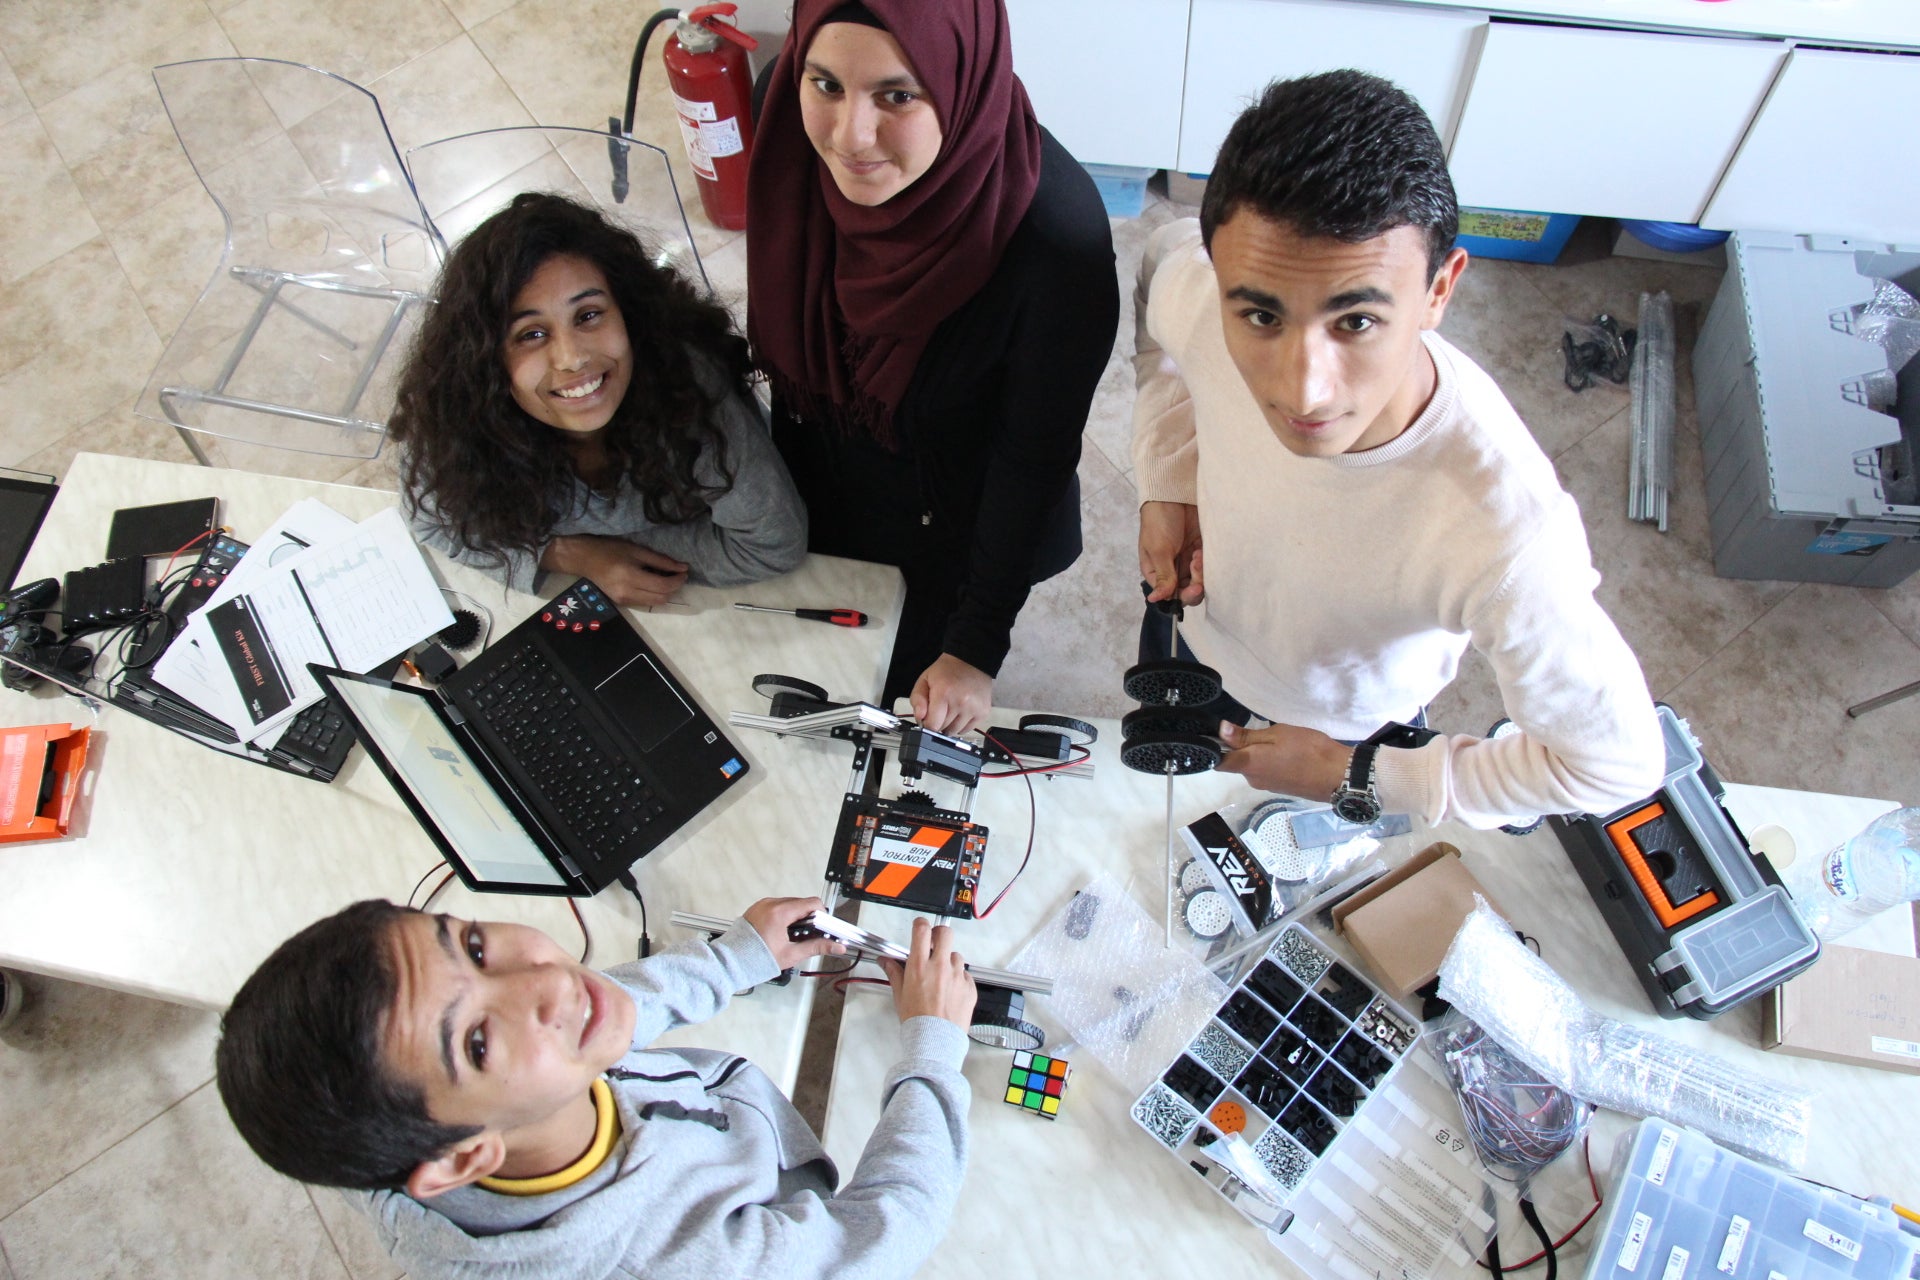 A group of students working on a project